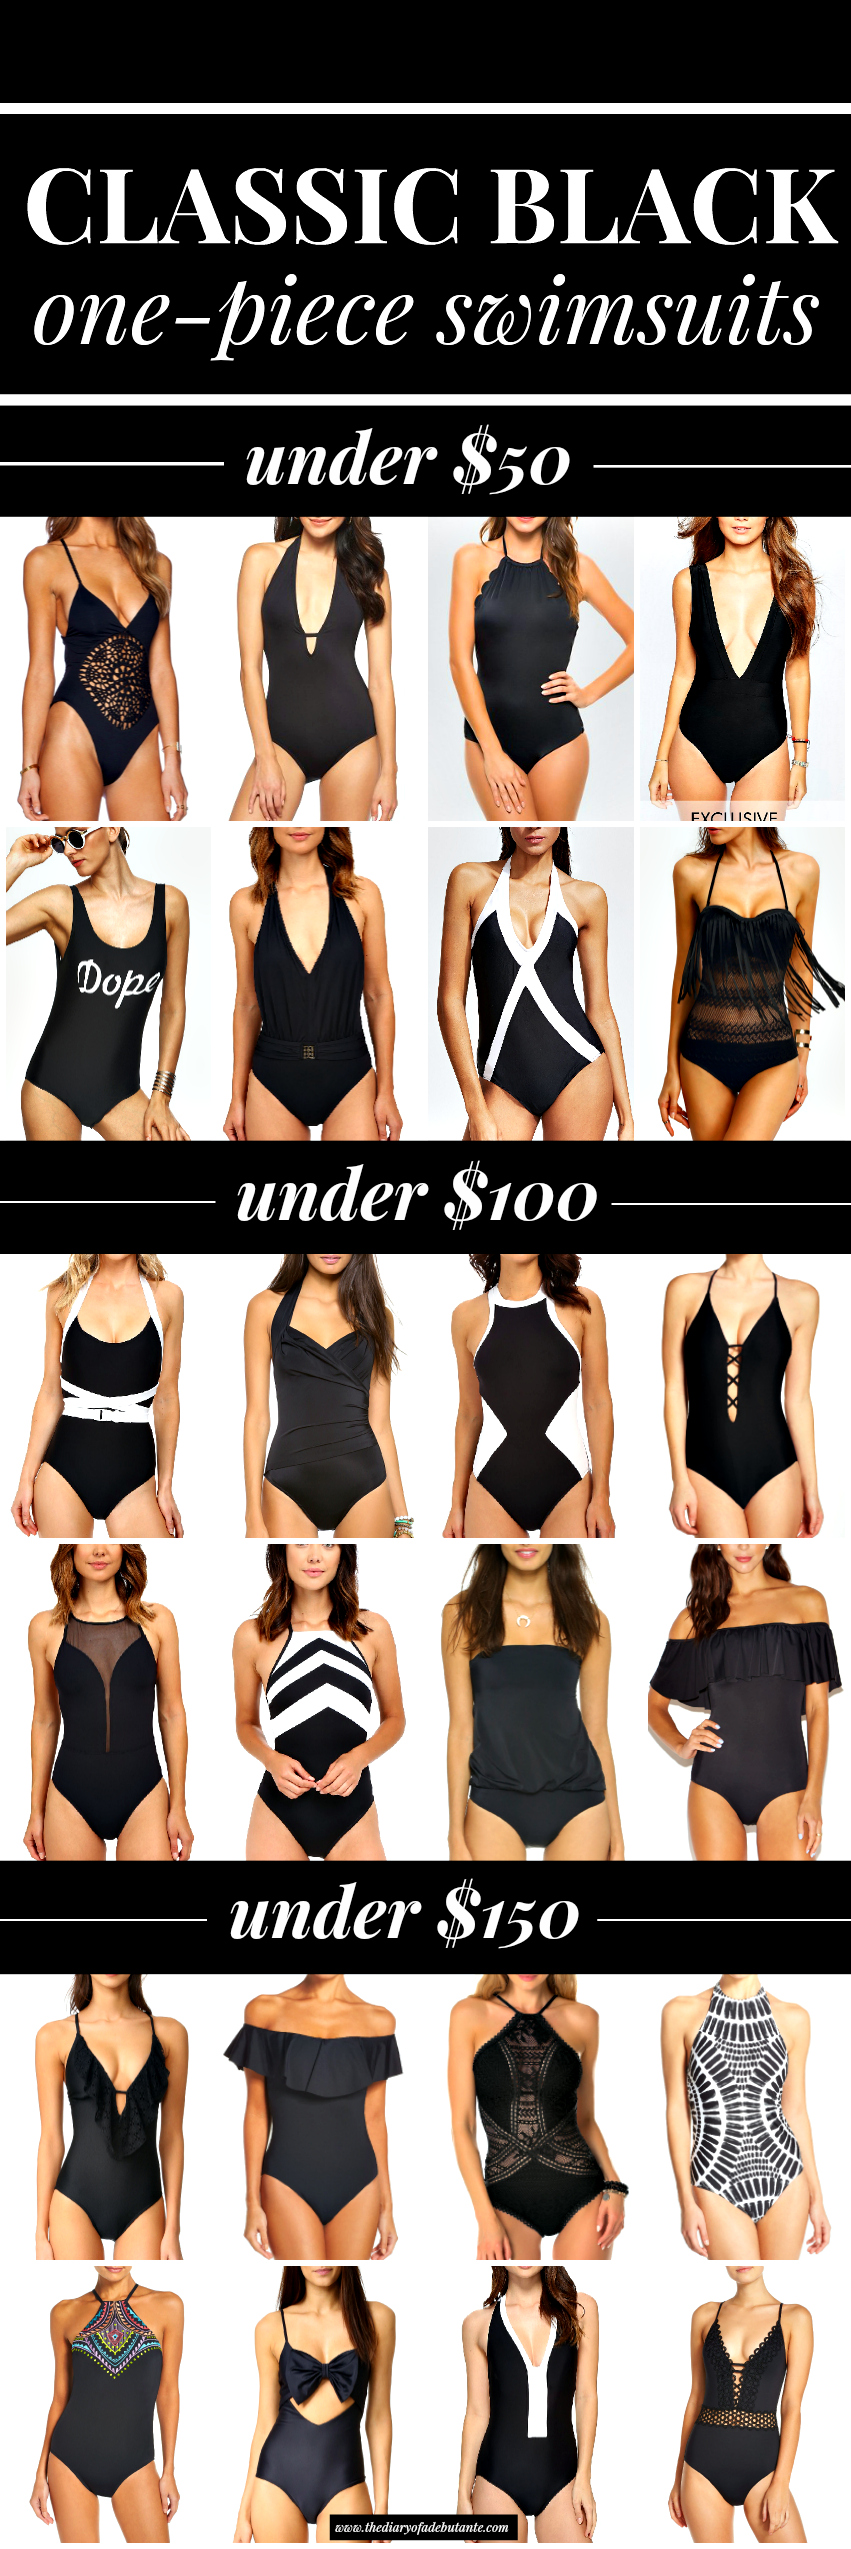 Black one piece swimsuits and monokinis for every budget